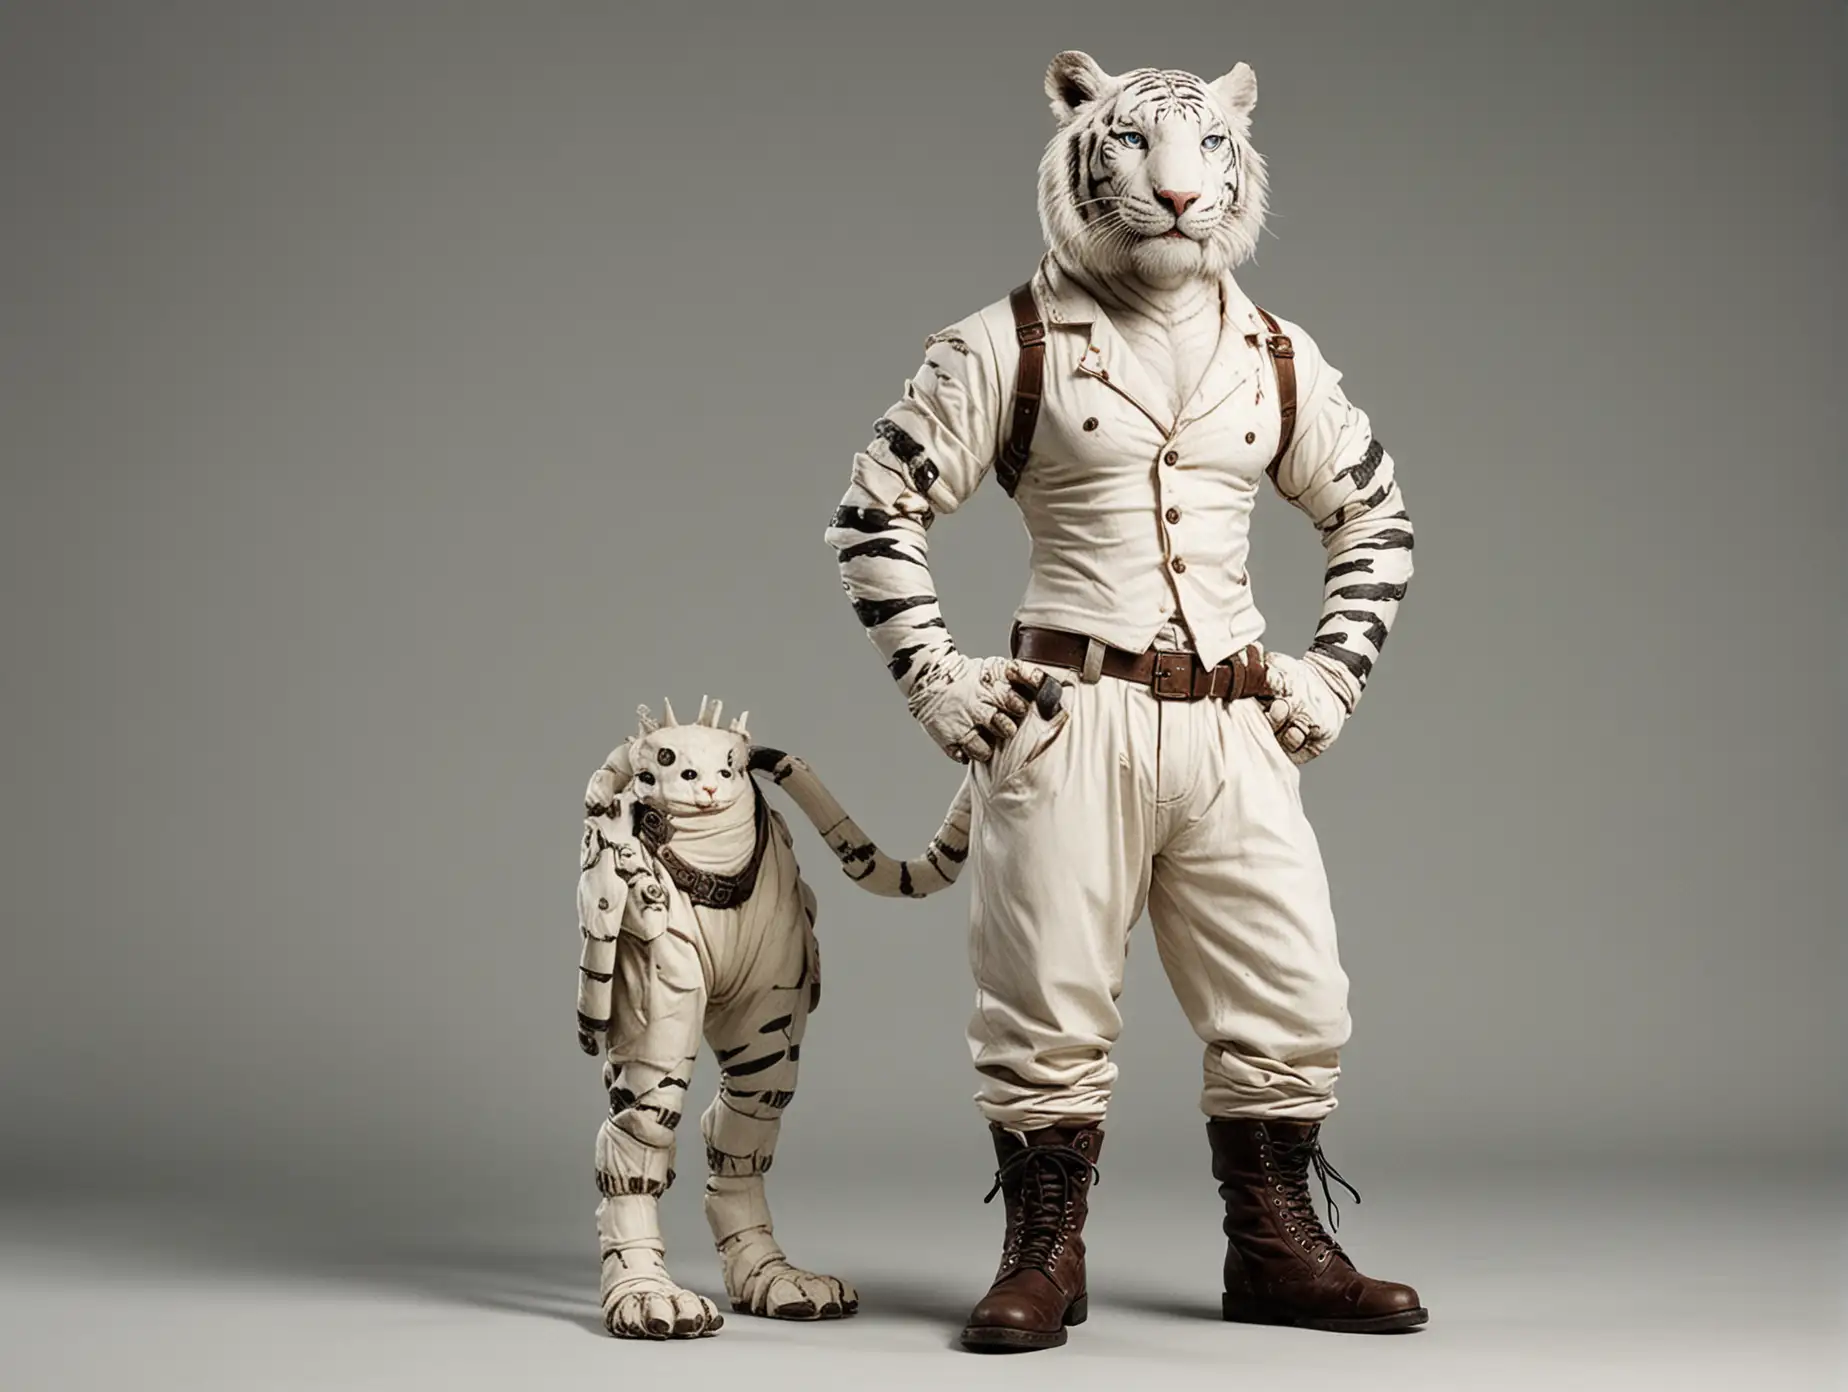 An anthropomorphic white tiger with a bare torso, trousers and boots